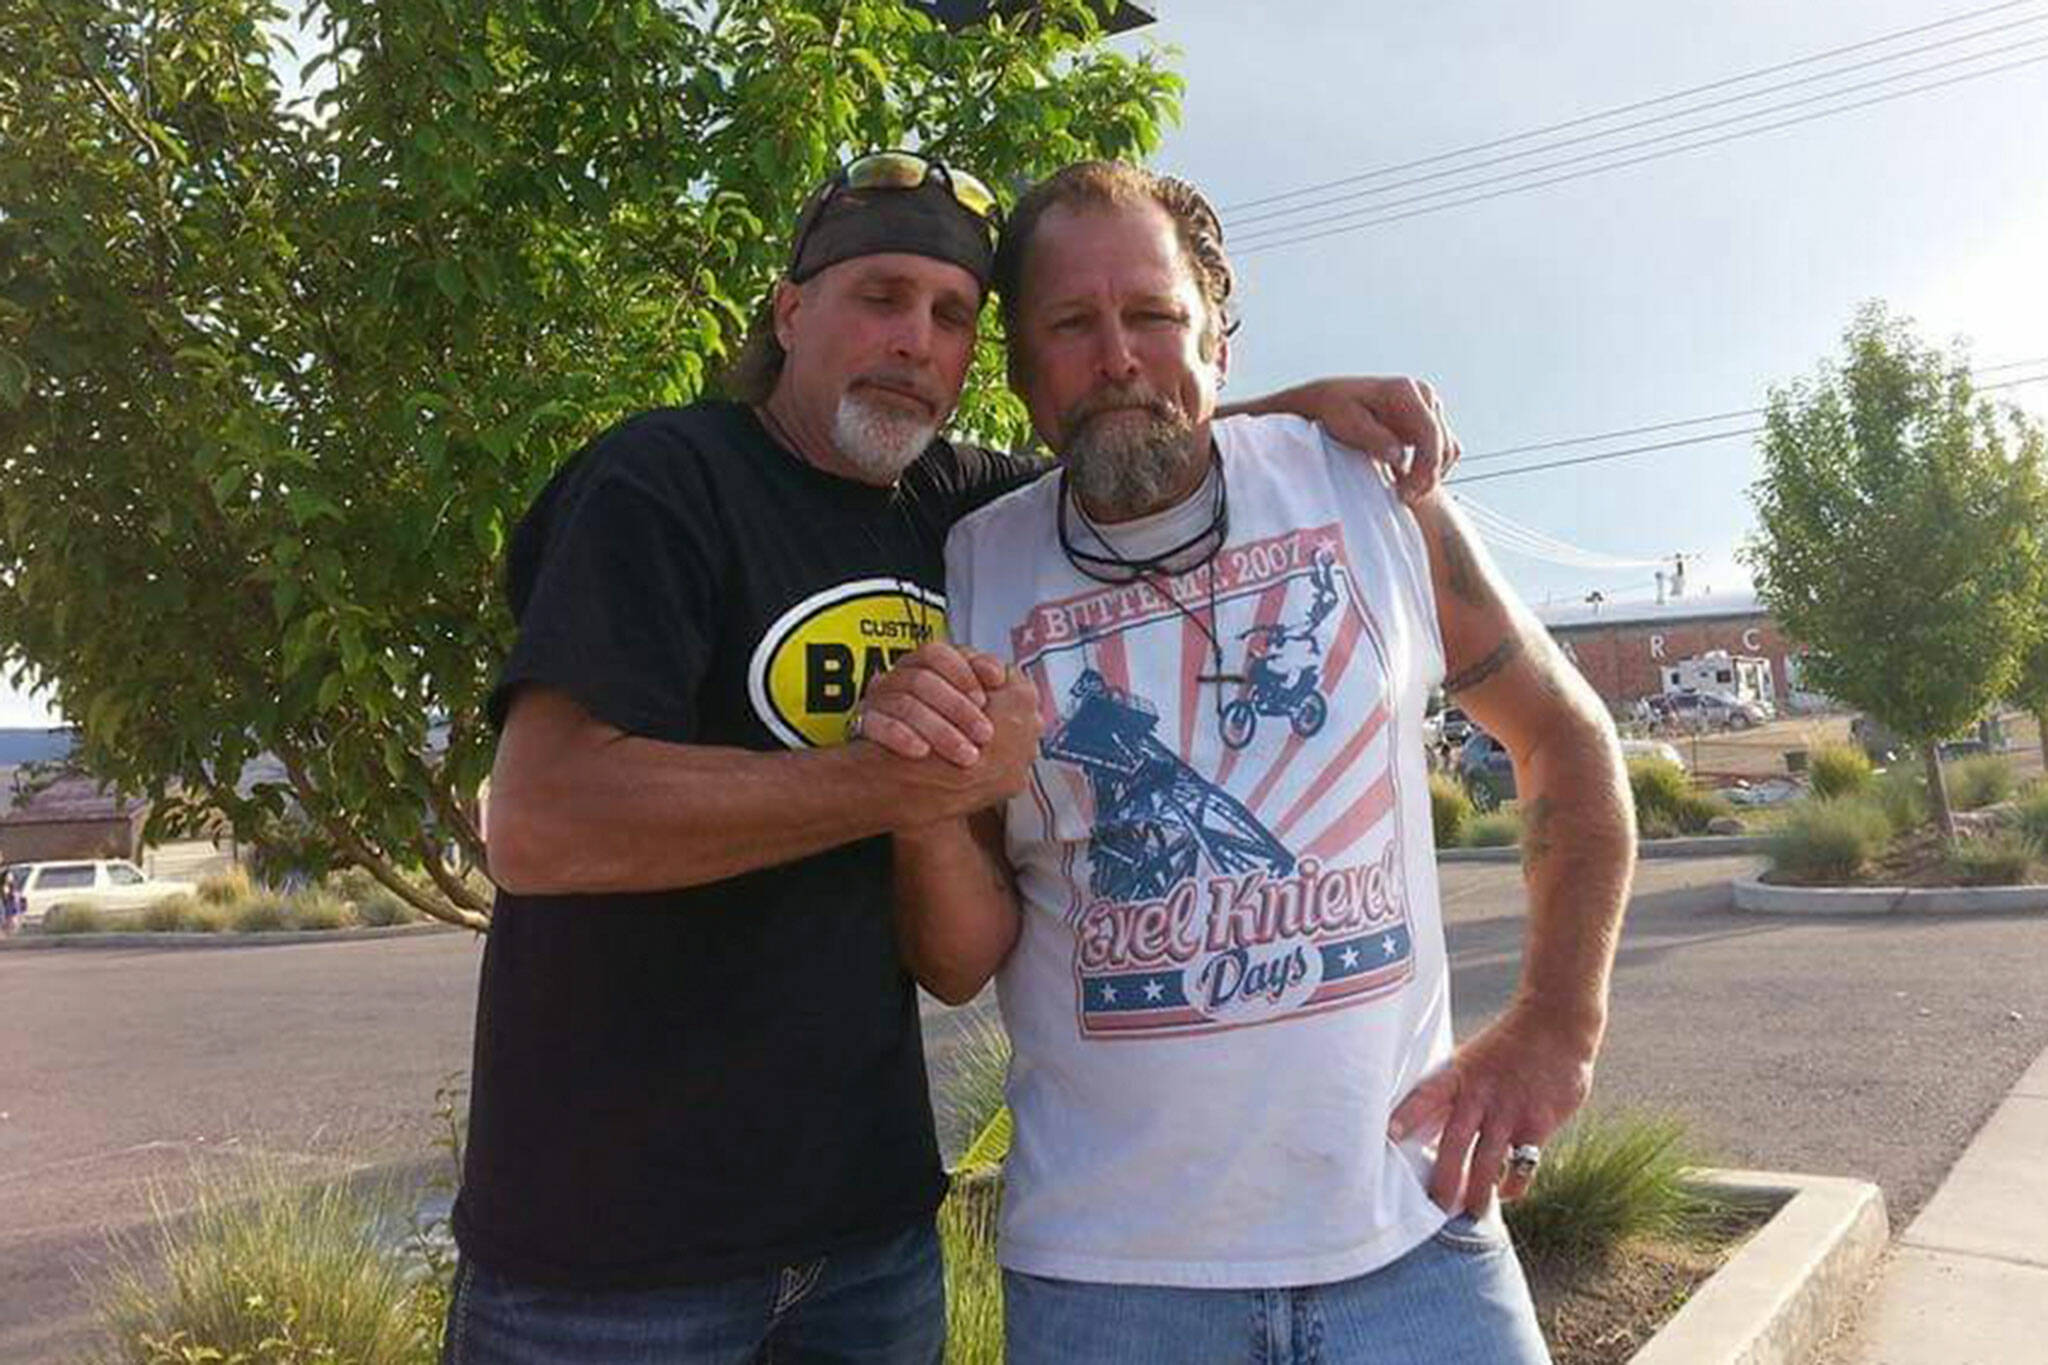 Photo courtesy of Todd Tjernell
Sequim’s Todd Tjernell, right, stands with Robbie Knievel in Butte, Mont., during one of their trips. Knievel, who died on Jan. 13, lived in the Sequim area for about a decade and befriended Tjernell and hired him to build stunt ramps for him.